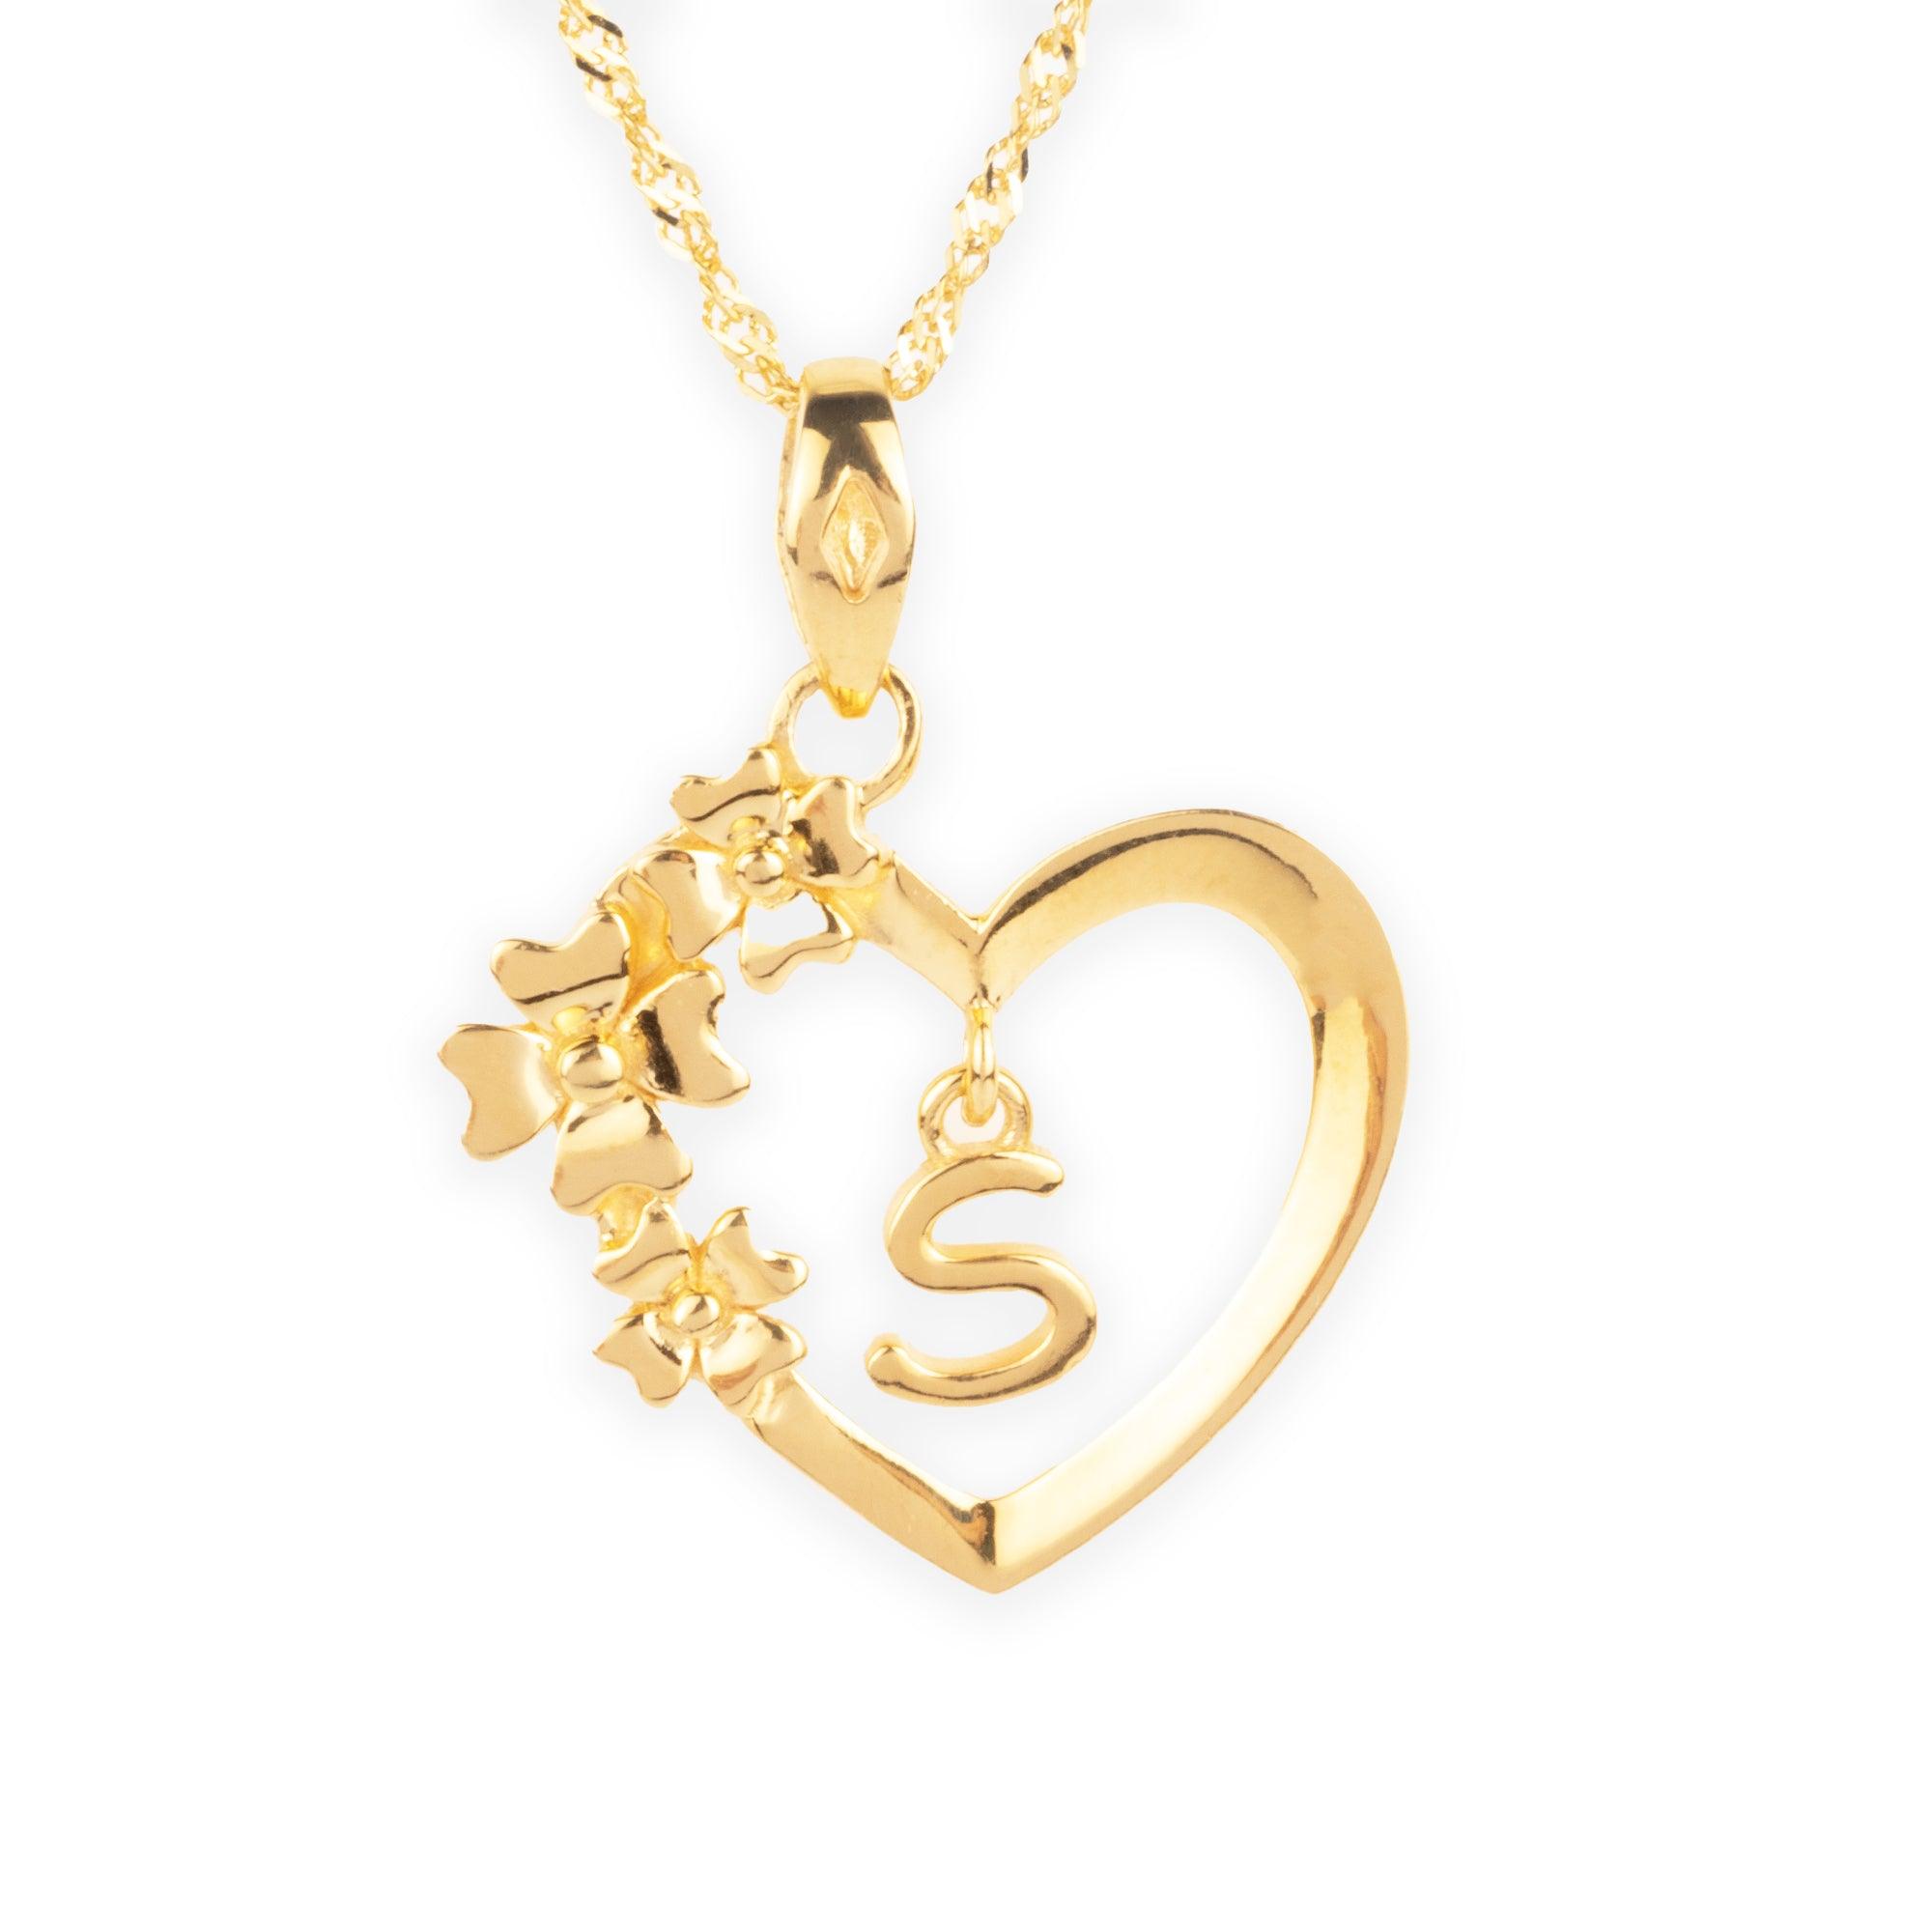 'S' 22ct Gold Heart Shape Initial Pendant with Flower Design P-7035-S - Minar Jewellers